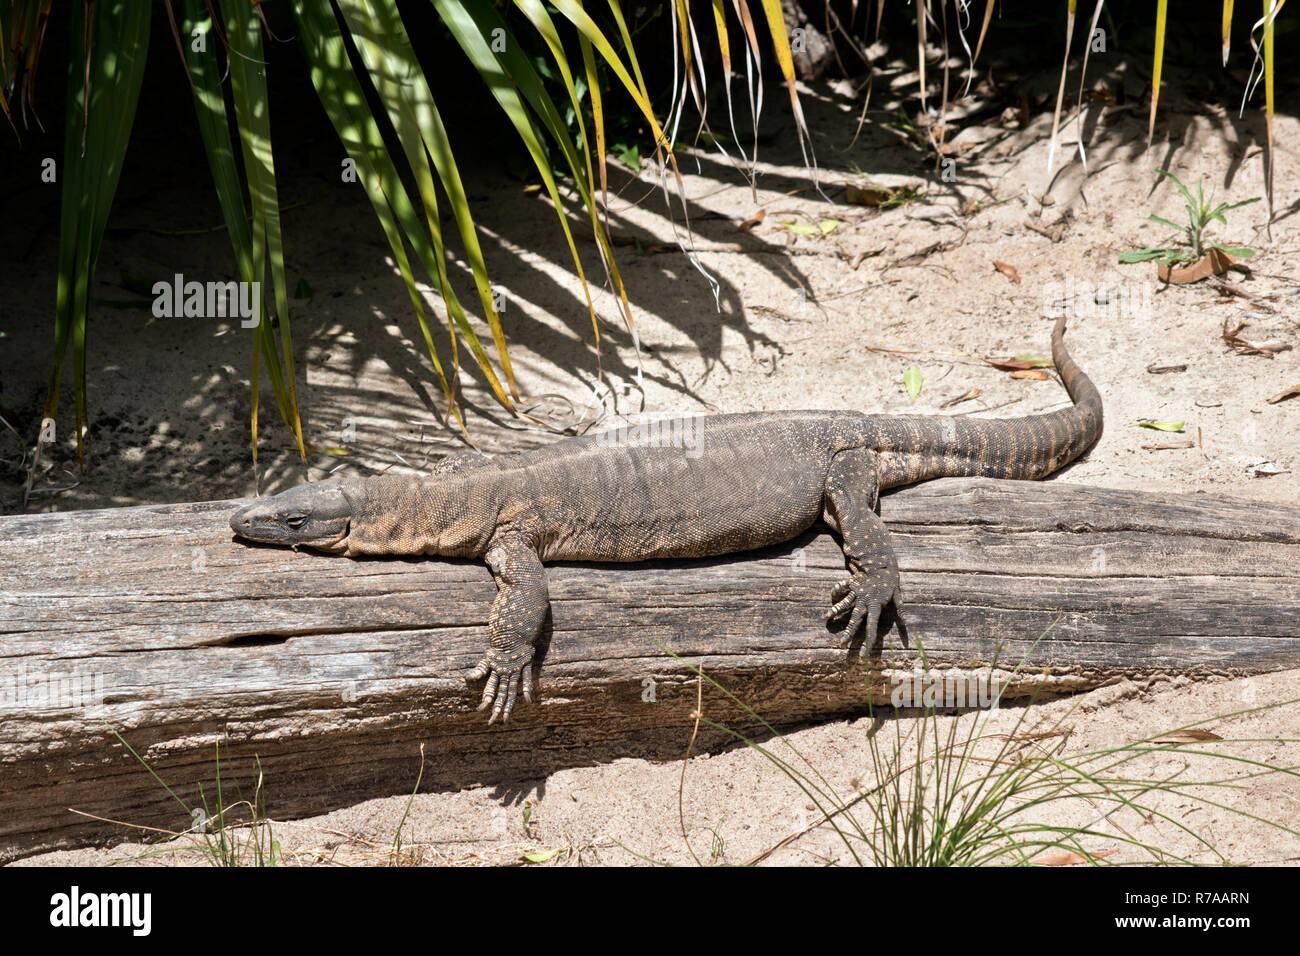 this is a side view of a rosenberg's monitor lizard Stock Photo